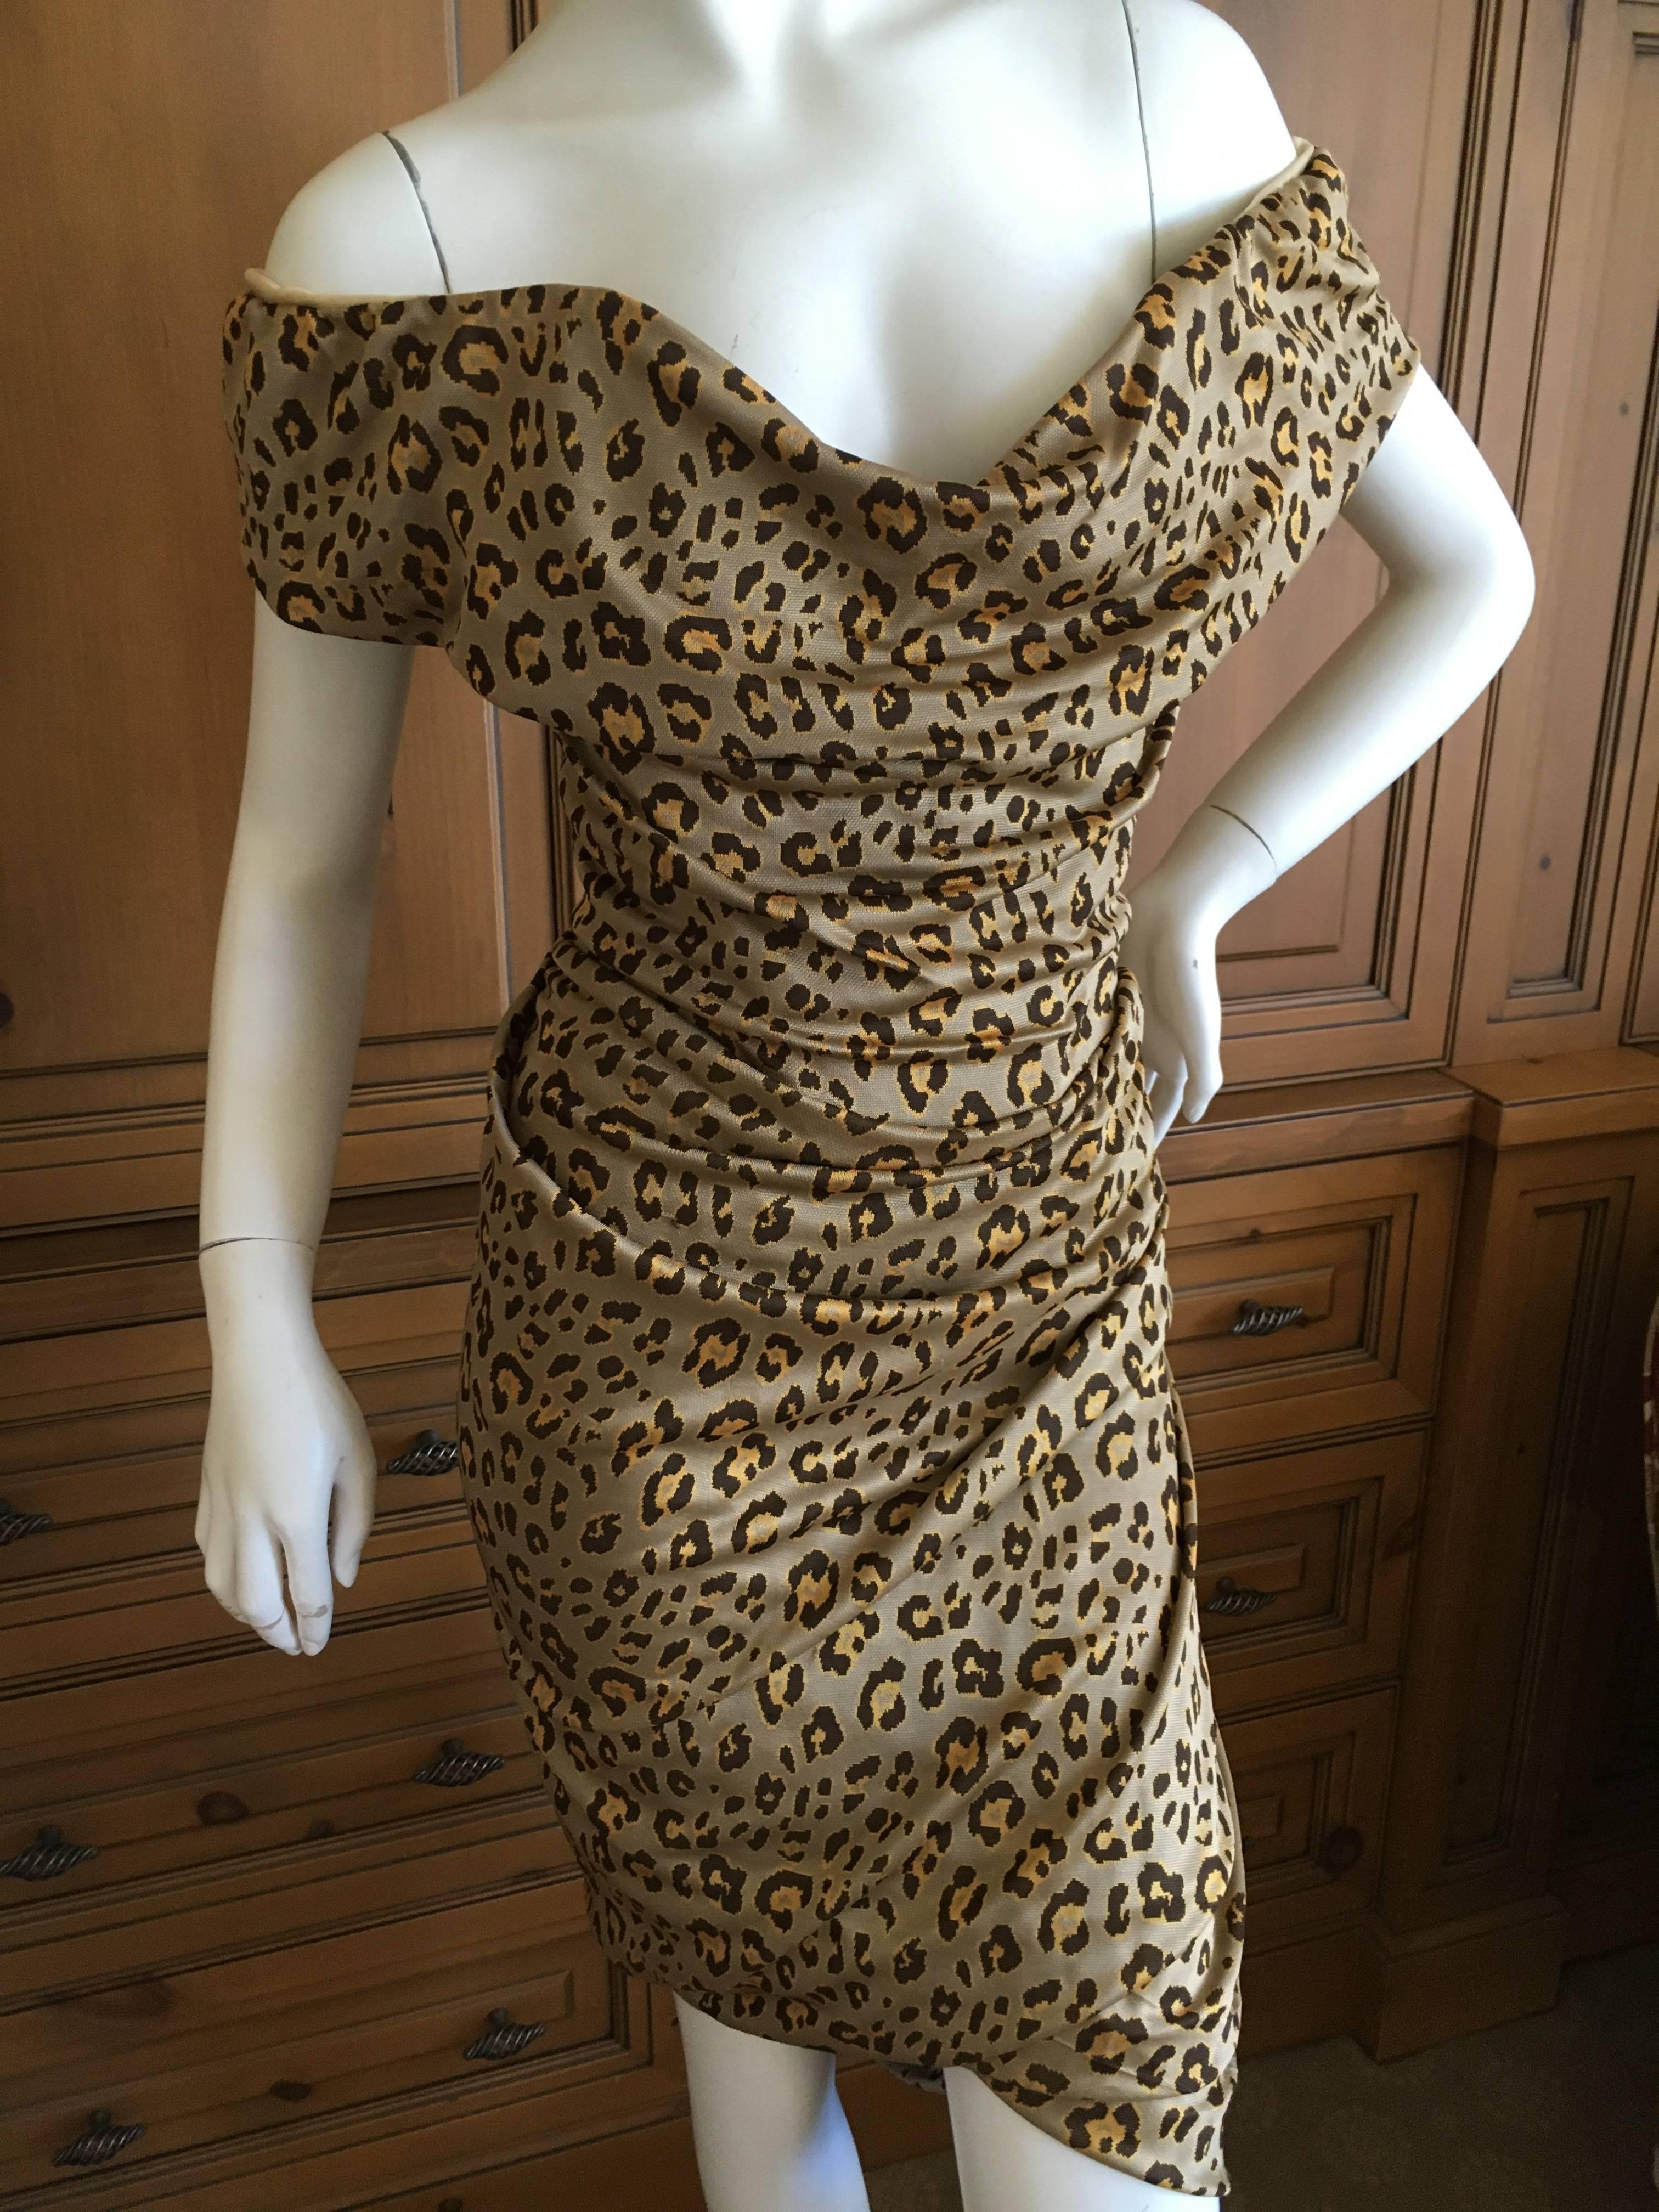 Vivienne Westwood Red Label Leopard Print Dress with Built In Corset In Excellent Condition For Sale In Cloverdale, CA